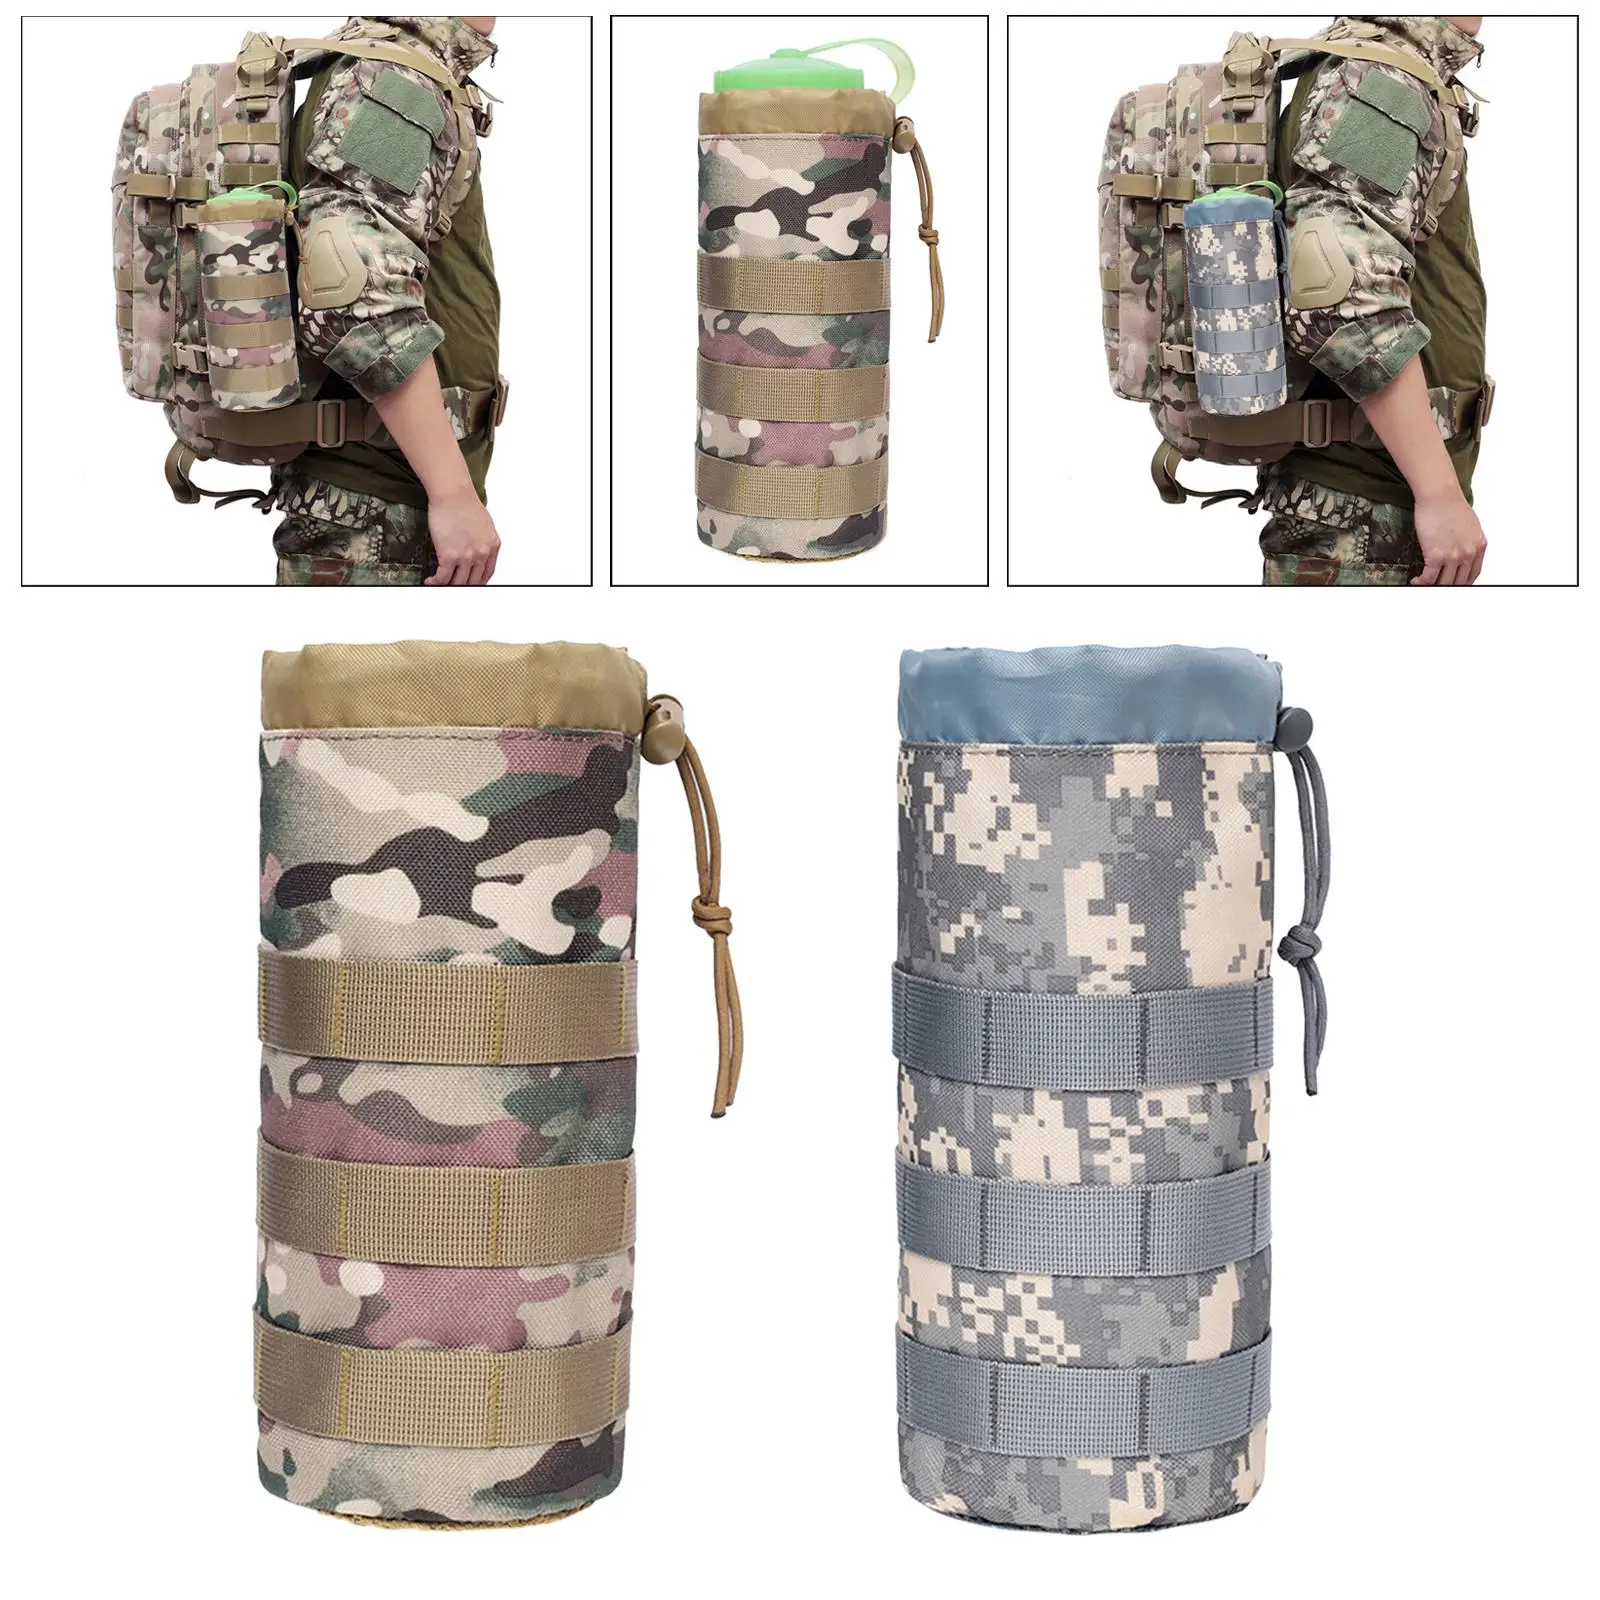 Hydration Carrier Drawstring Adjustable Molle Water Bottle Holder Pouch for Travel Mountaineering Hiking Hunting Walking